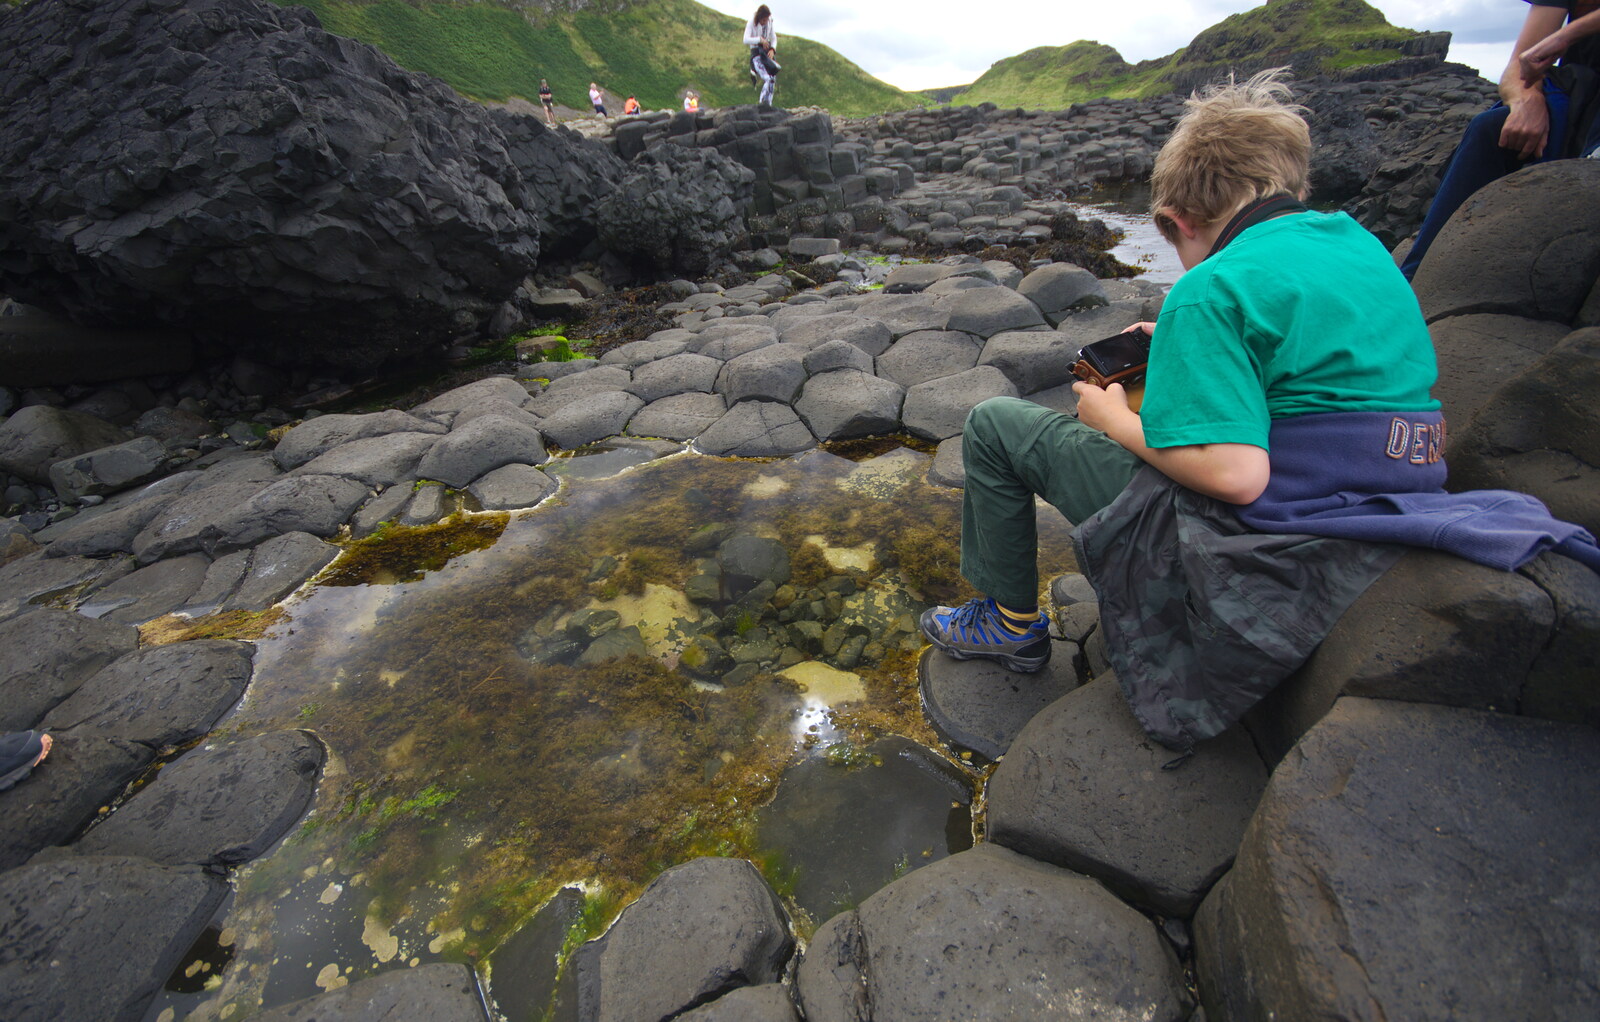 Fred takes some close-up photos from The Giant's Causeway, Bushmills, County Antrim, Northern Ireland - 14th August 2019